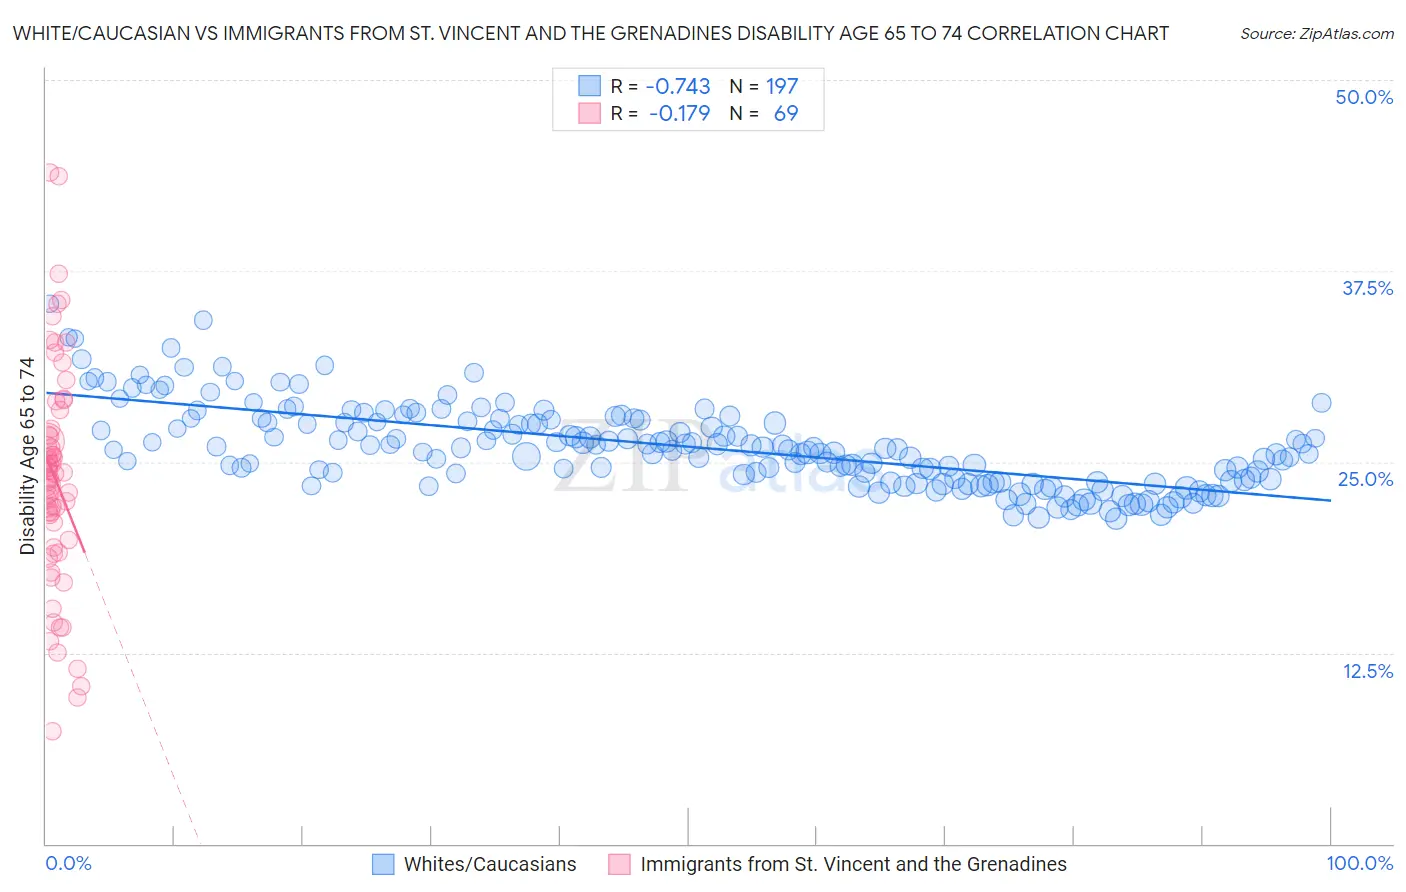 White/Caucasian vs Immigrants from St. Vincent and the Grenadines Disability Age 65 to 74